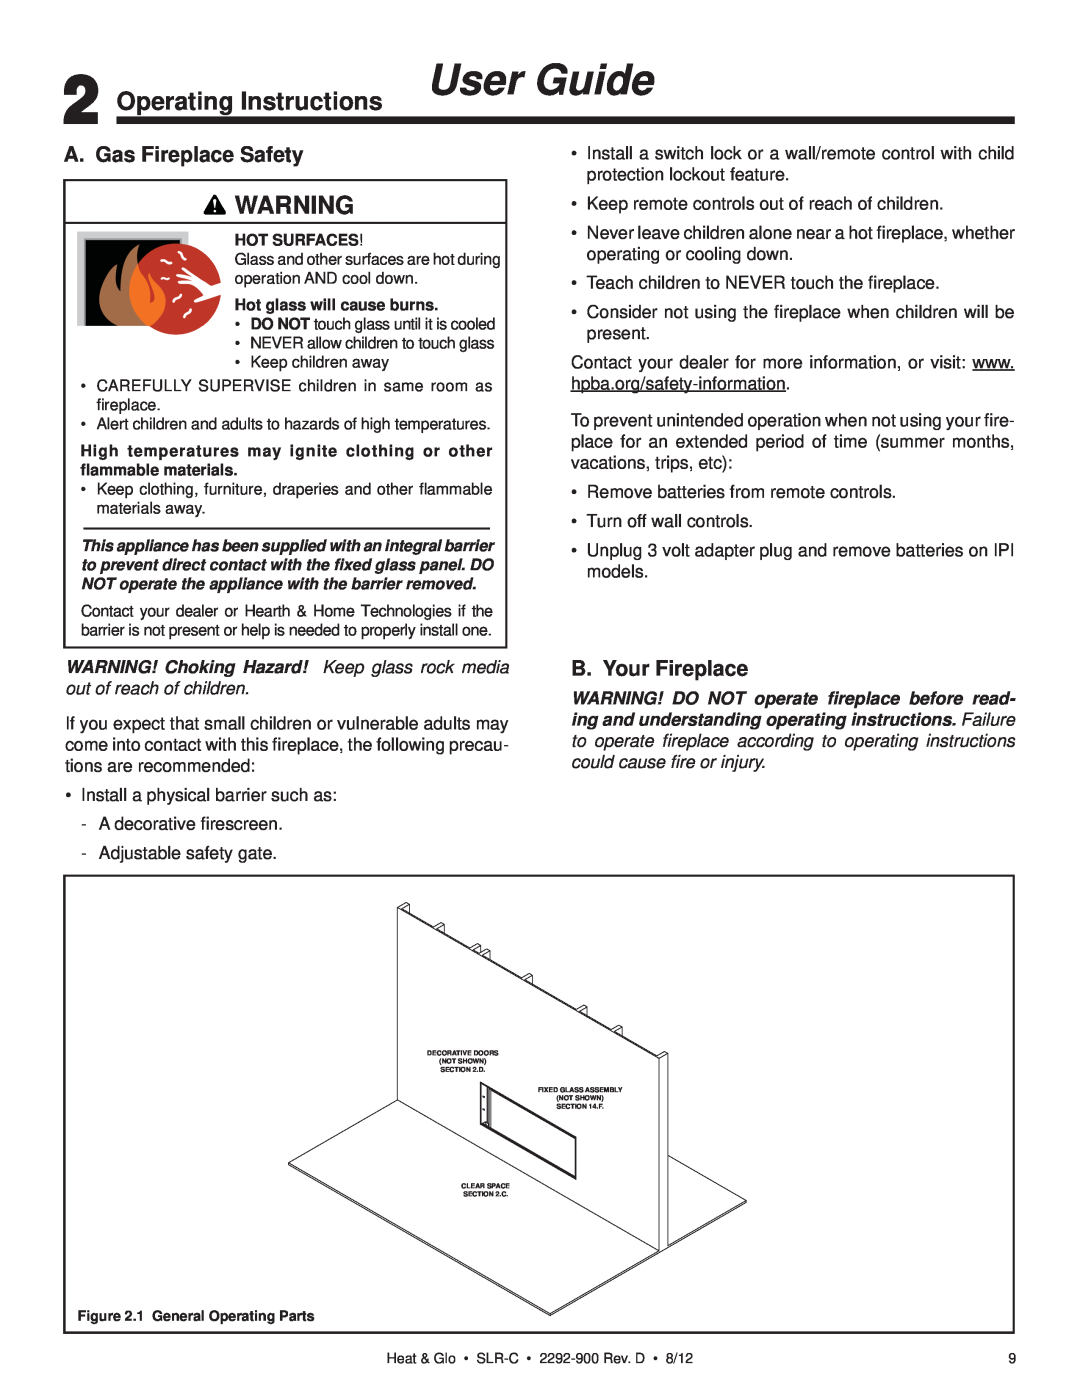 Heat & Glo LifeStyle SLR-C (COSMO) Operating Instructions User Guide, A. Gas Fireplace Safety, B. Your Fireplace 